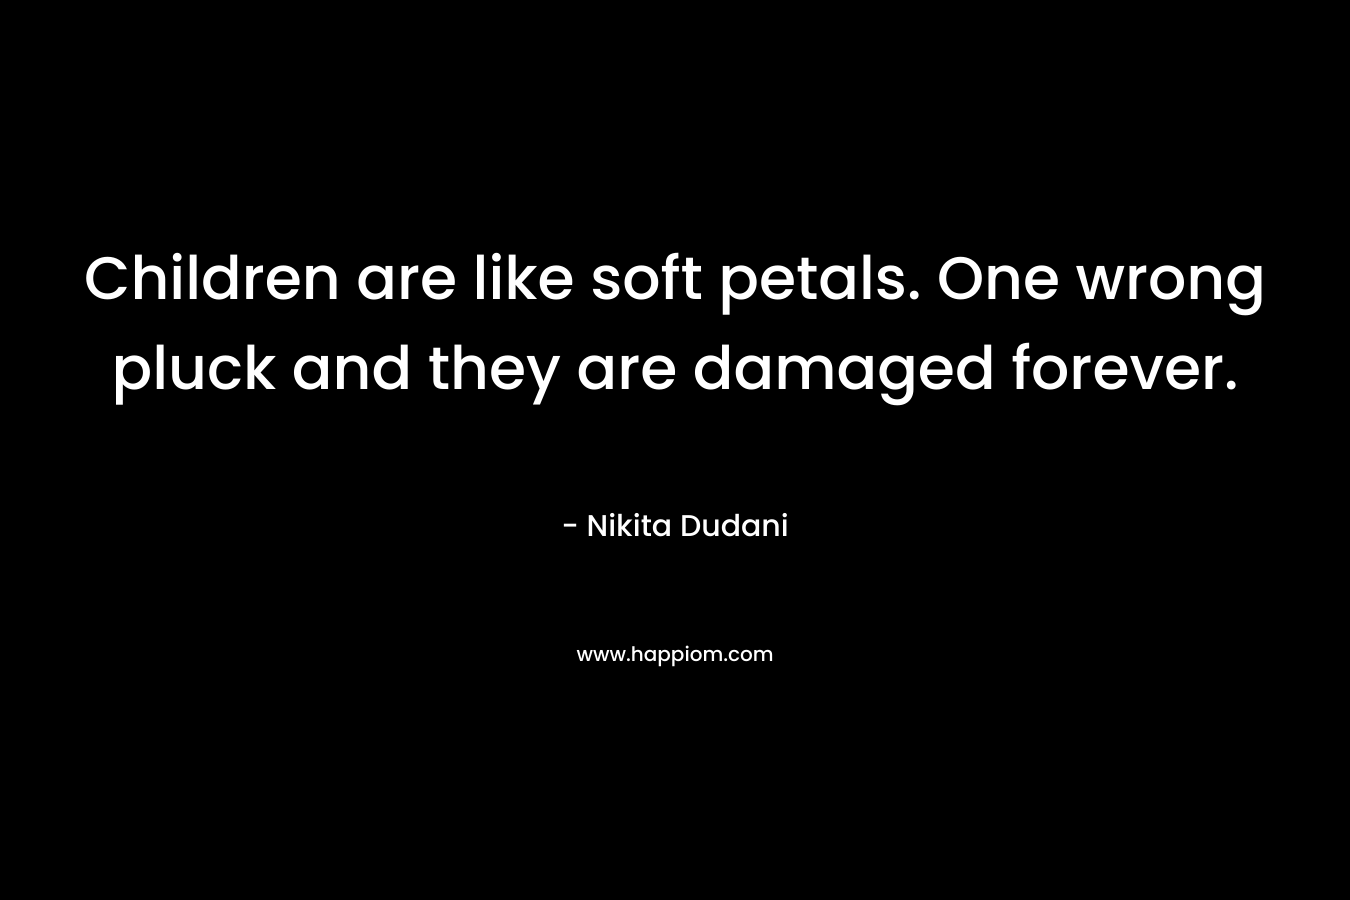 Children are like soft petals. One wrong pluck and they are damaged forever. – Nikita Dudani